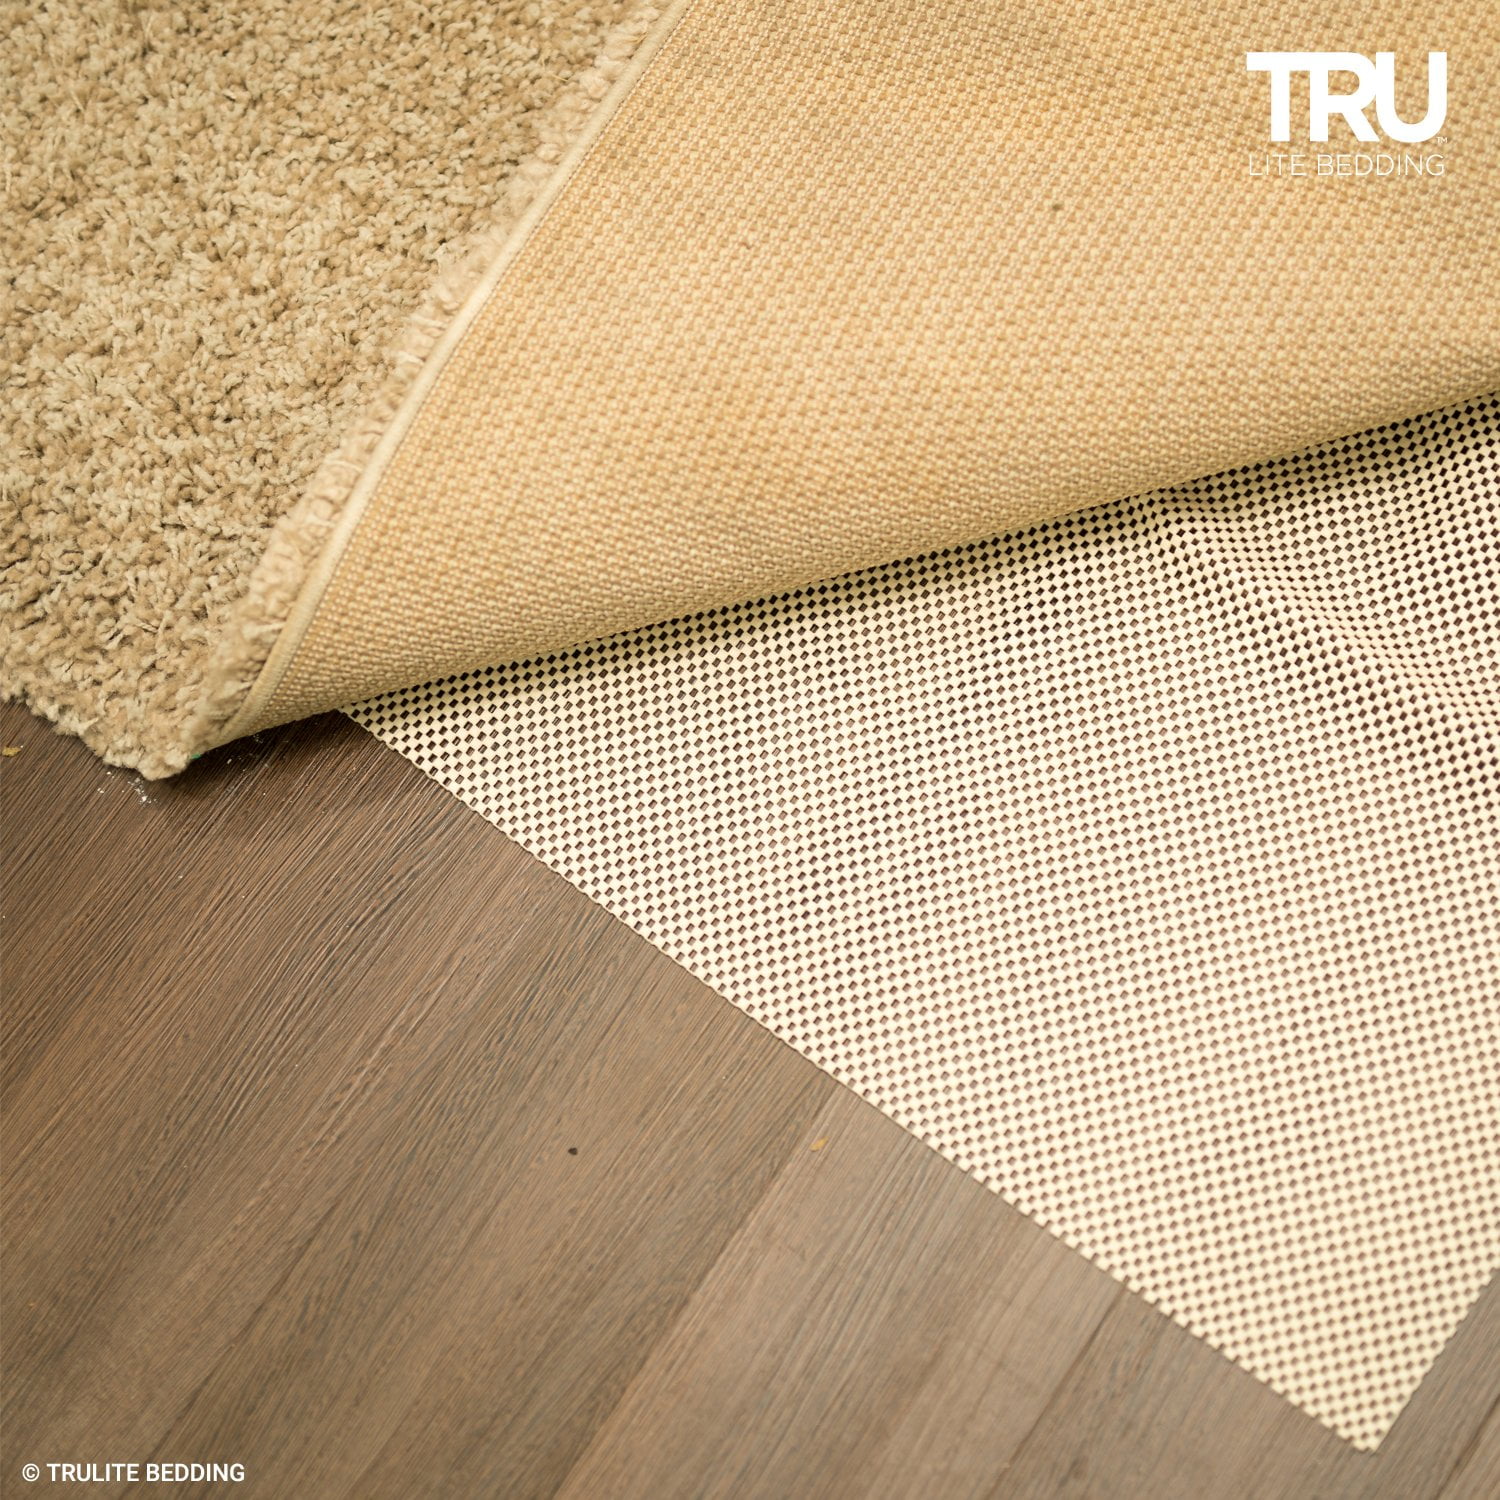 Trim to fit Any Size Furniture in Place Lock Area Rugs TRU Lite Rug Gripper Carpets Non-Slip Rug Pad for Hardwood Floors 2 x 4 Non Skid Washable Furniture Pad Mats